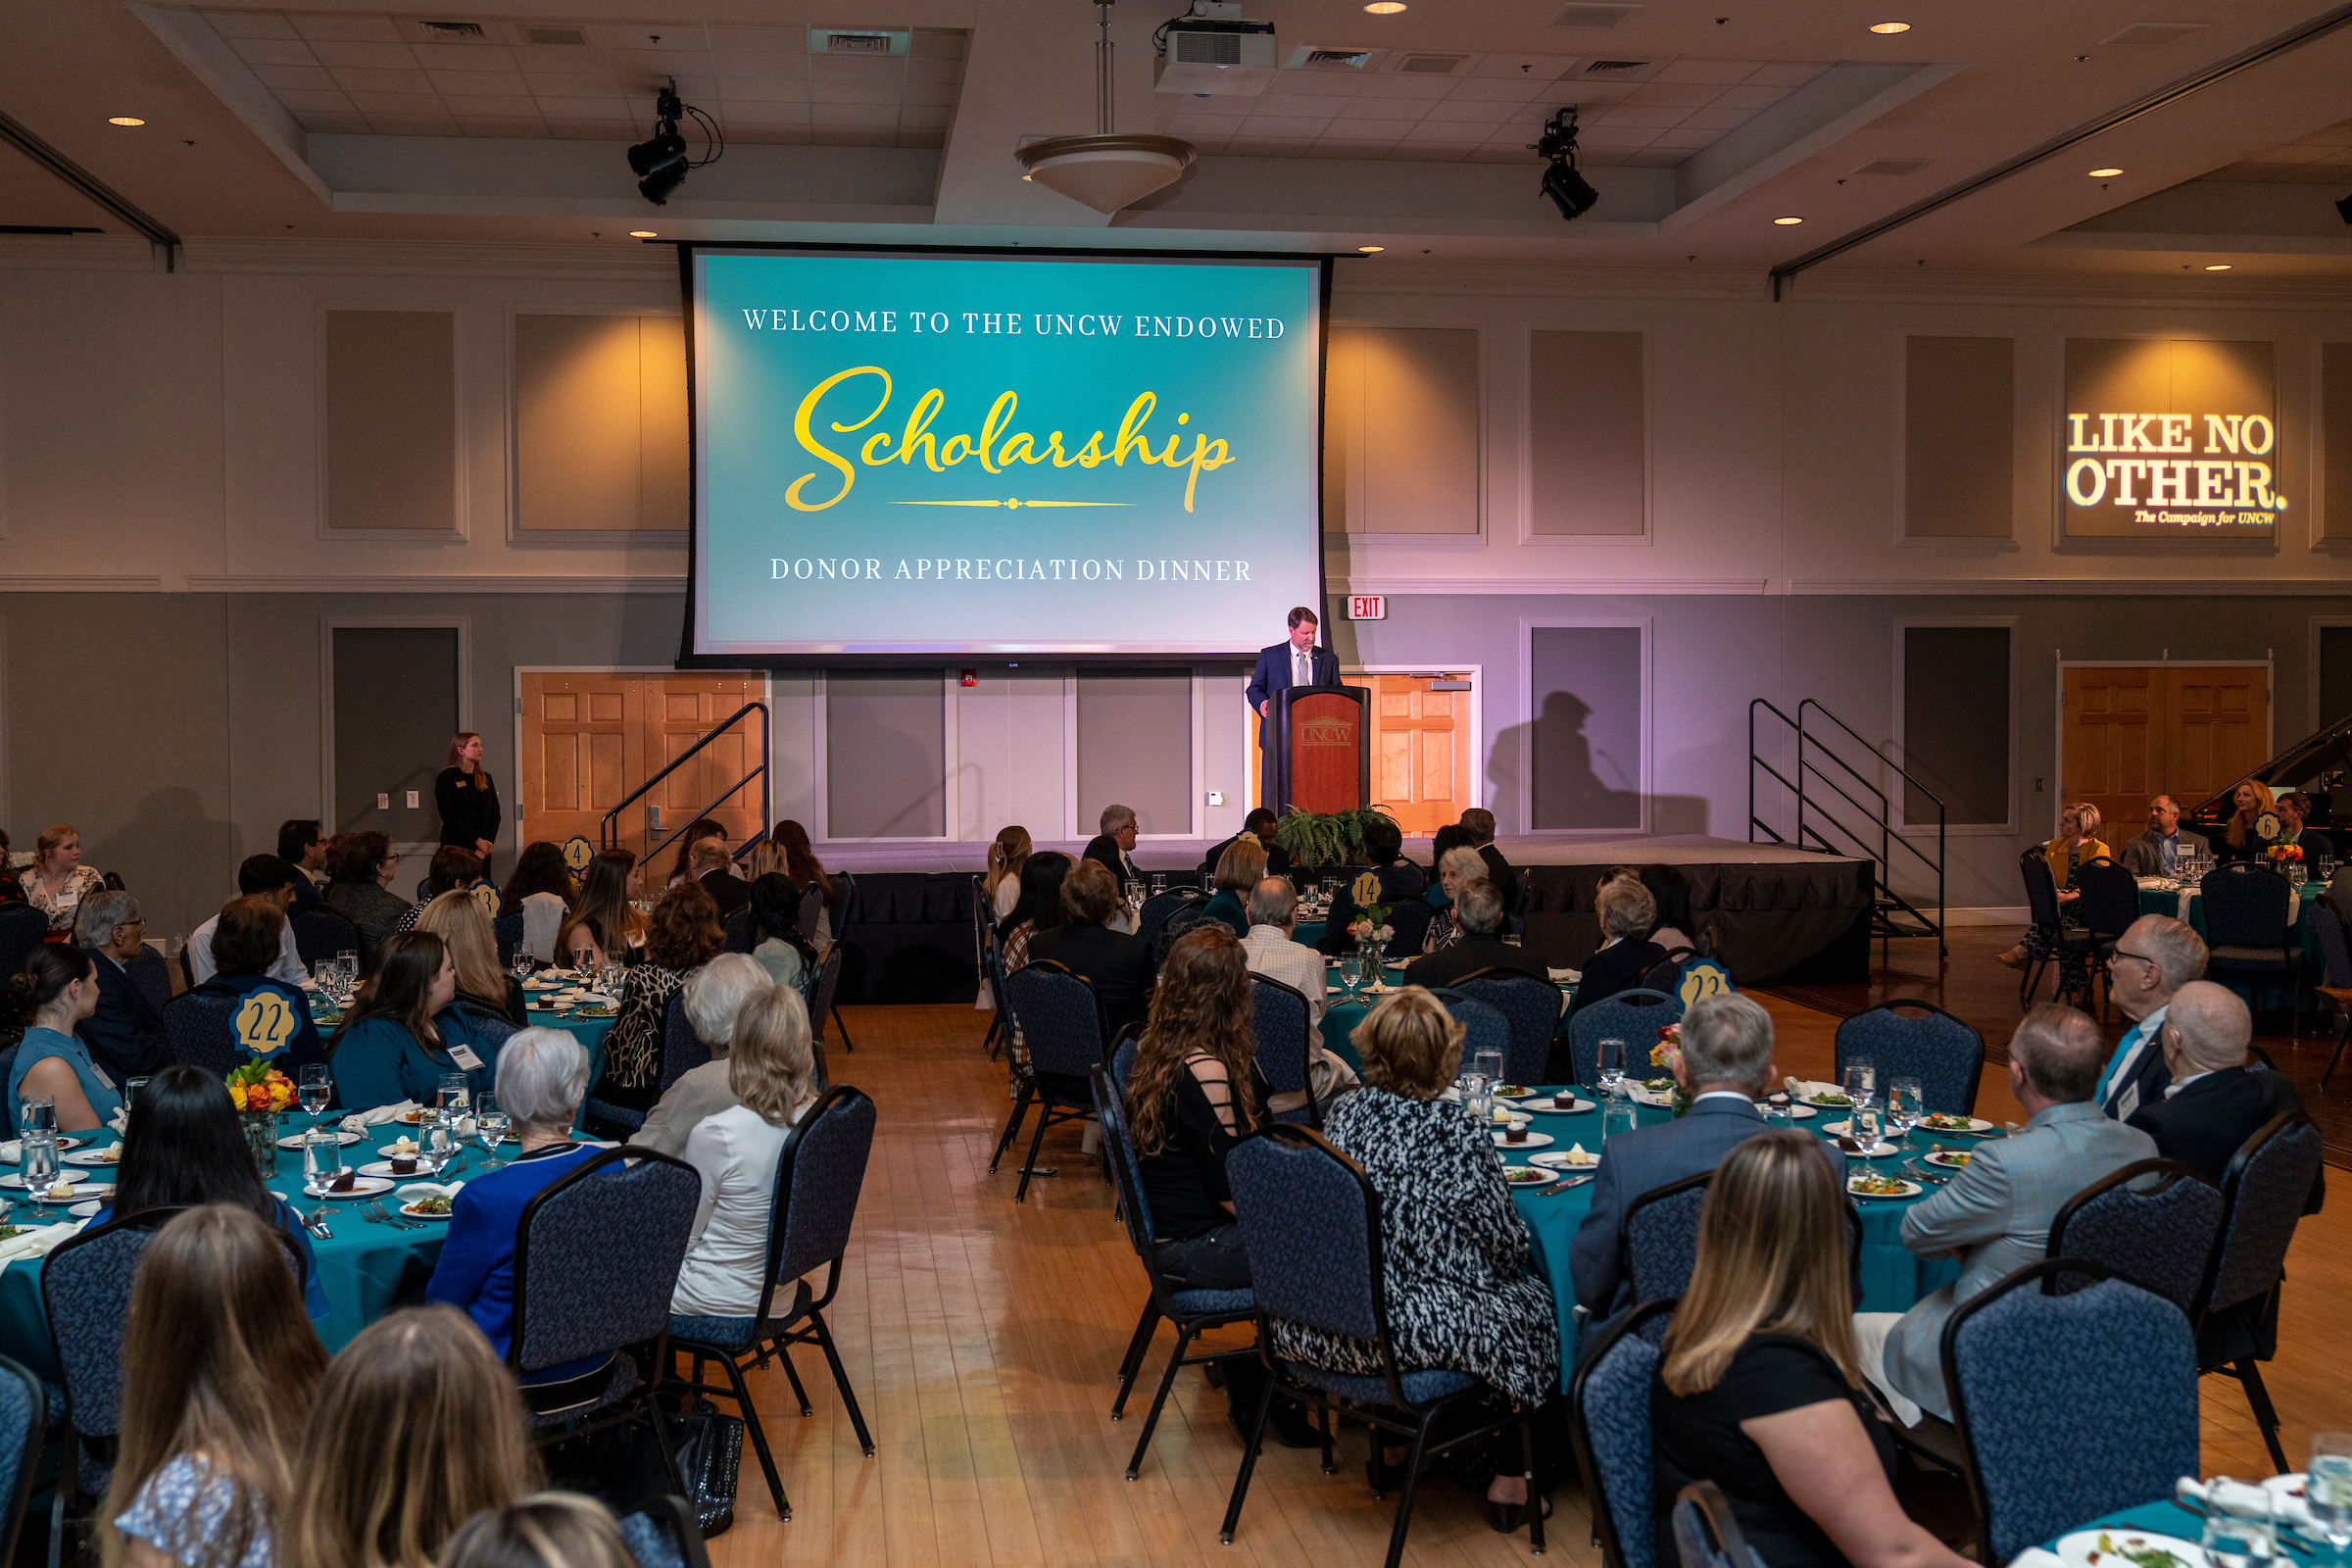 UNCW honored its endowed scholarship donors at an appreciation dinner.